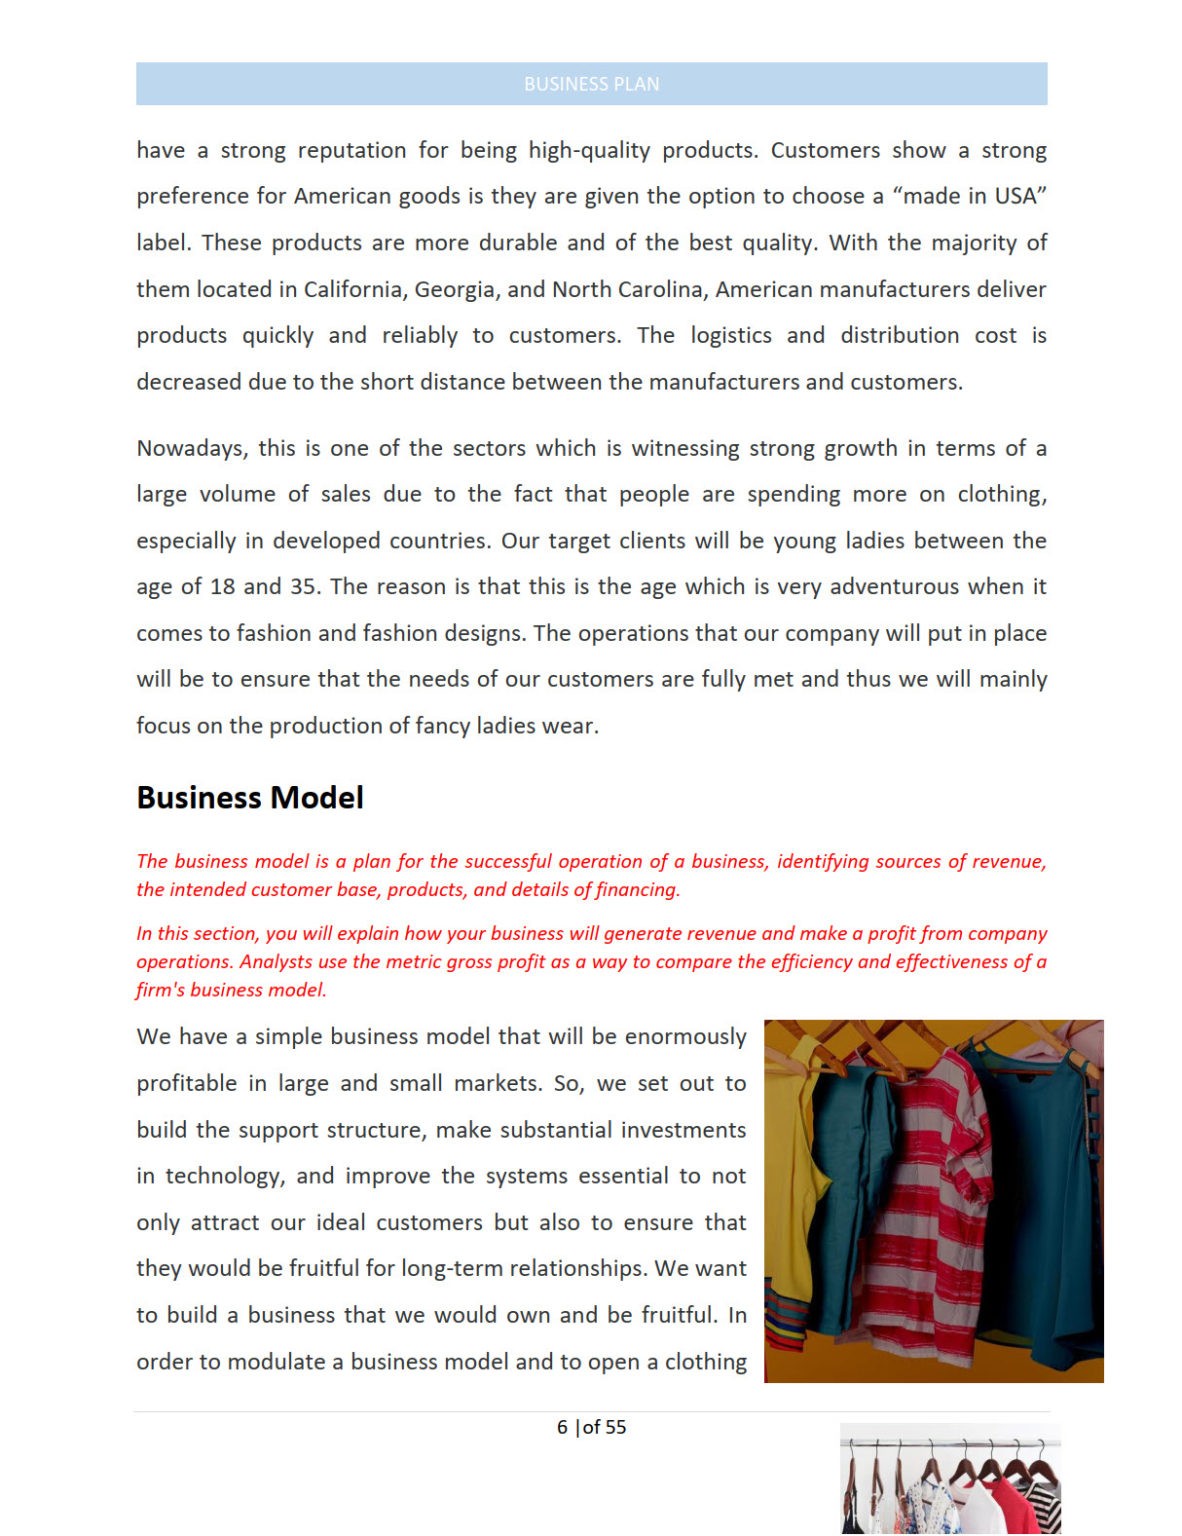 business plan for clothing brand ppt